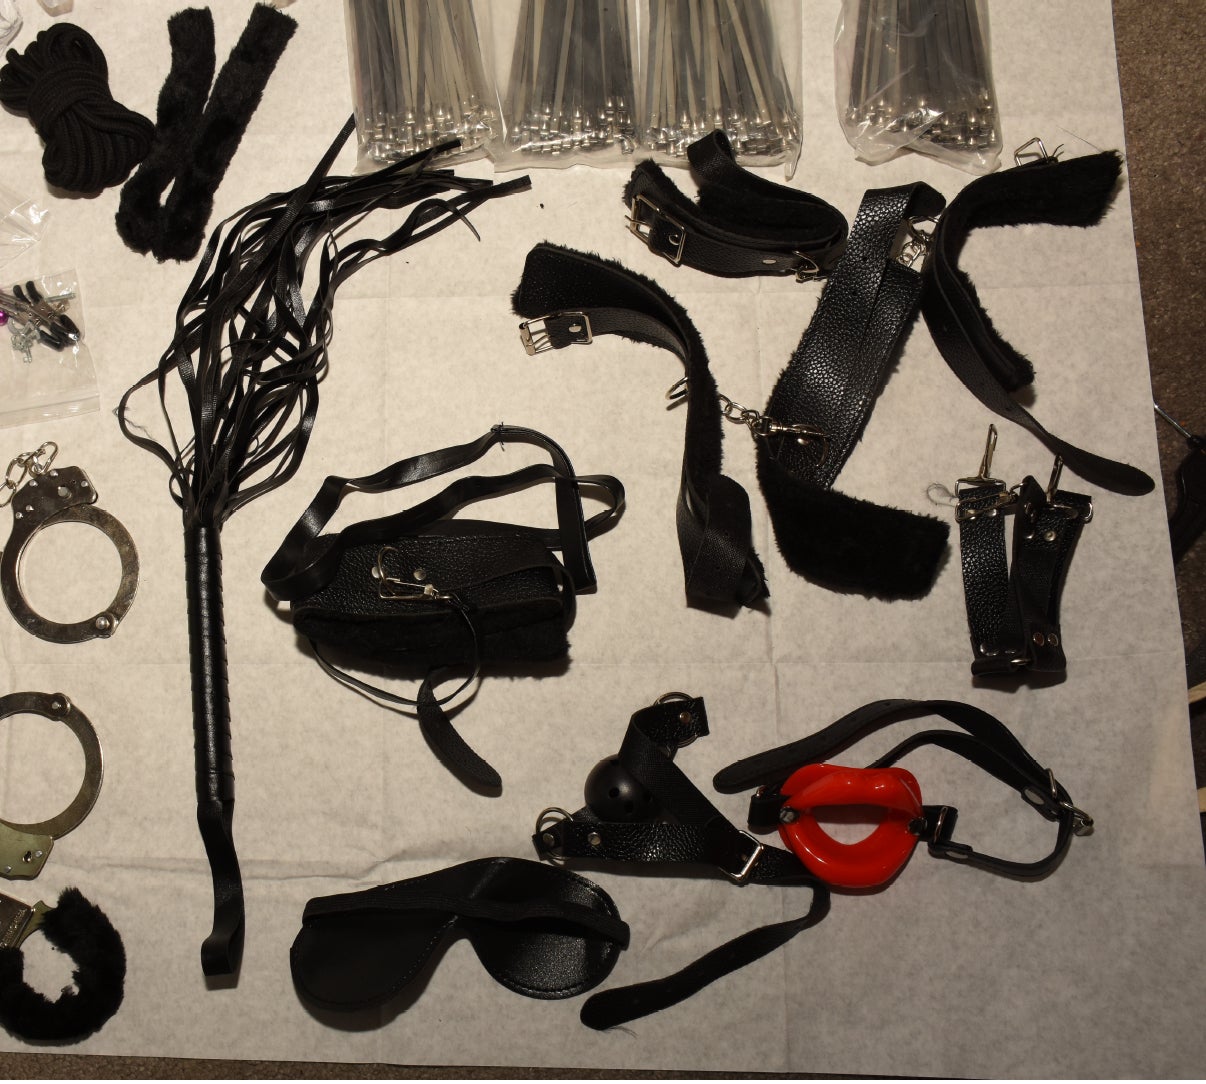 A picture of an alleged ‘kidnap kit’ shown in the trial of Gavin Plumb